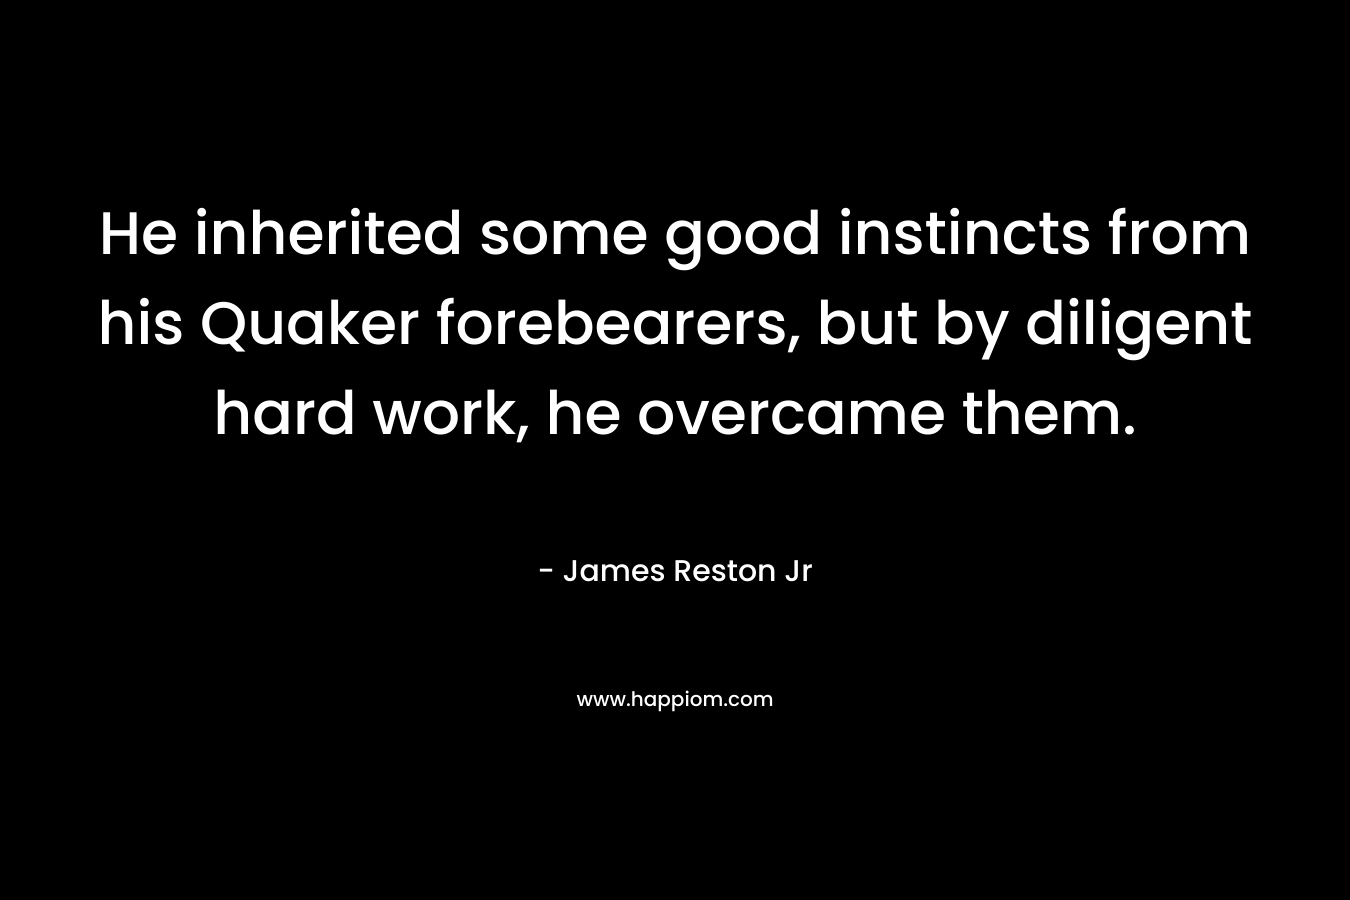 He inherited some good instincts from his Quaker forebearers, but by diligent hard work, he overcame them. – James Reston Jr